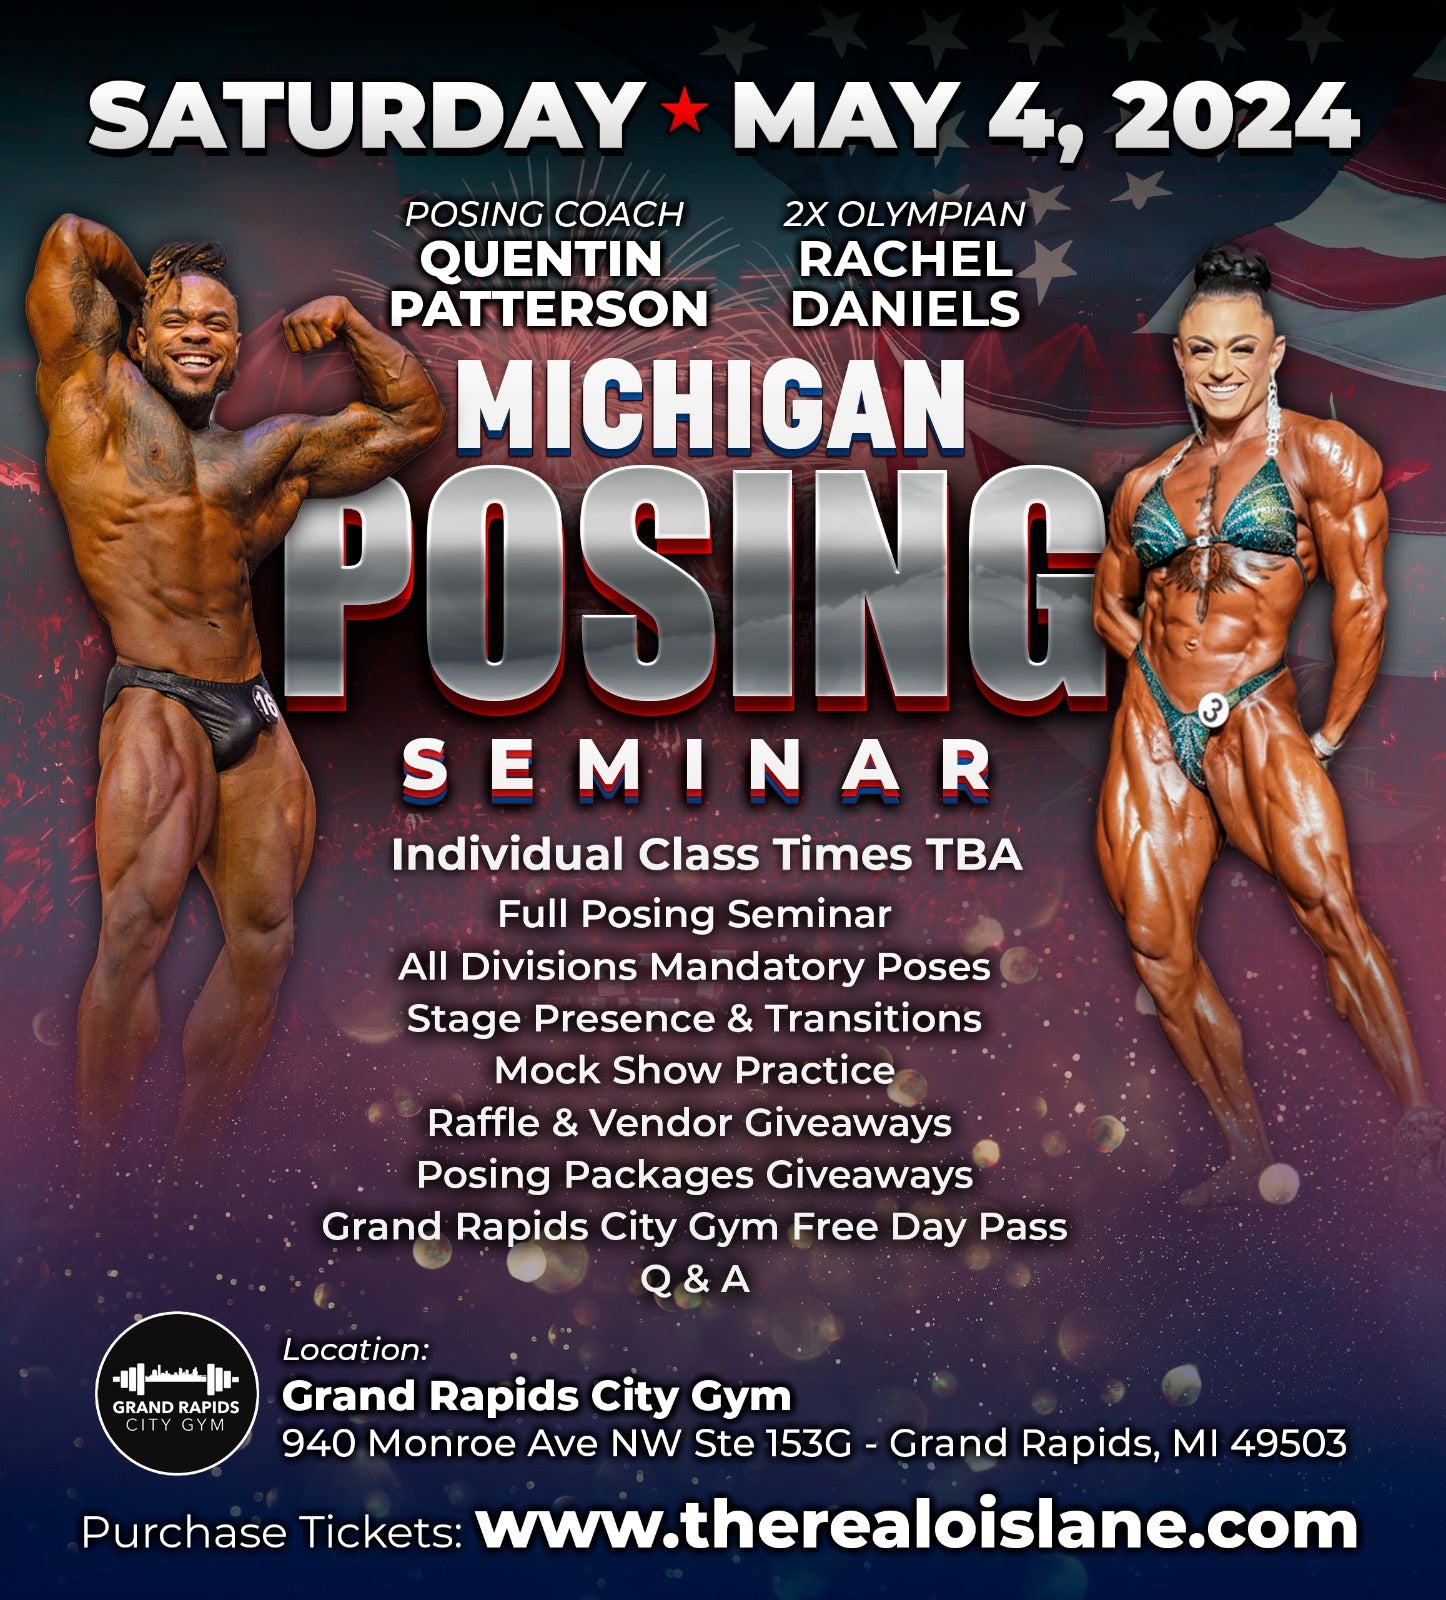 The Art of Bodybuilding Poses: How to Showcase Your Hard Work on Stage -  The Pro Fit Posing